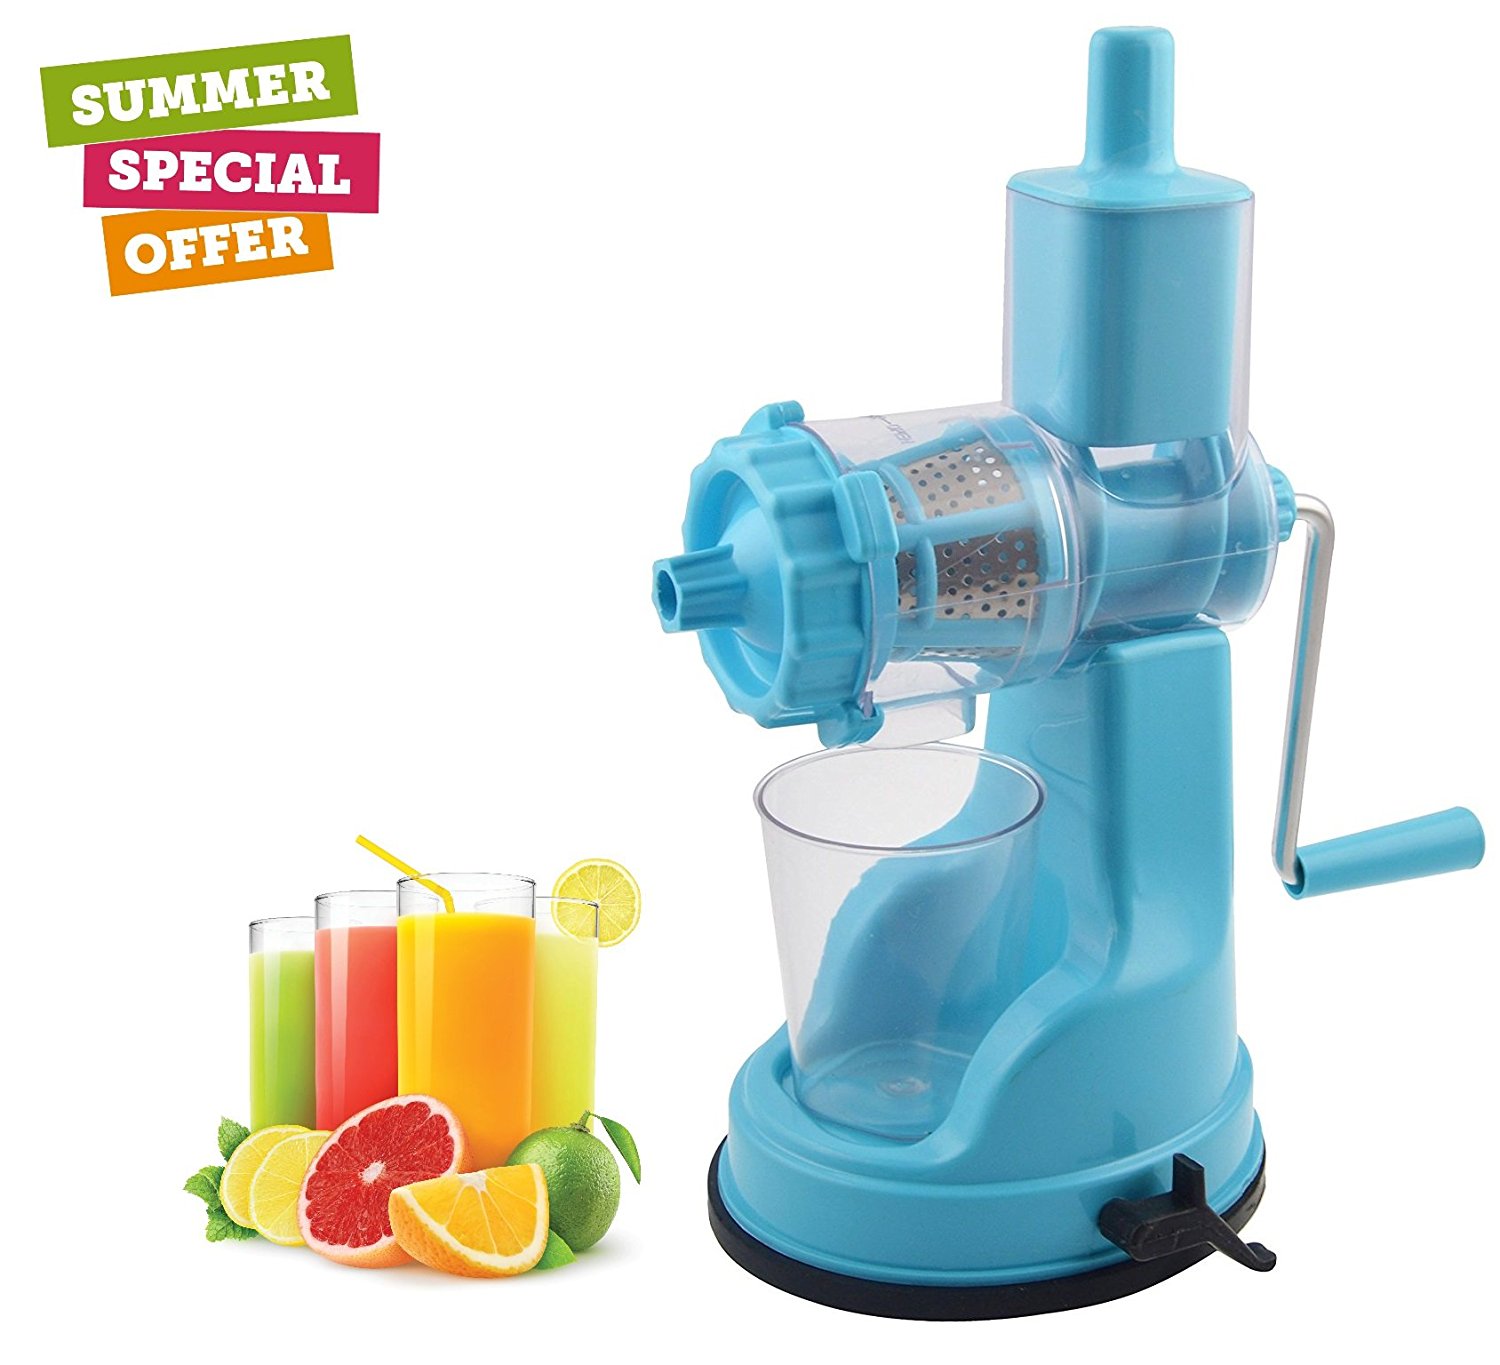 Amazon: Buy Floraware Plastic Fruit and Vegetable Juicer, Blue (Ipl_Blue) at Rs 278 only